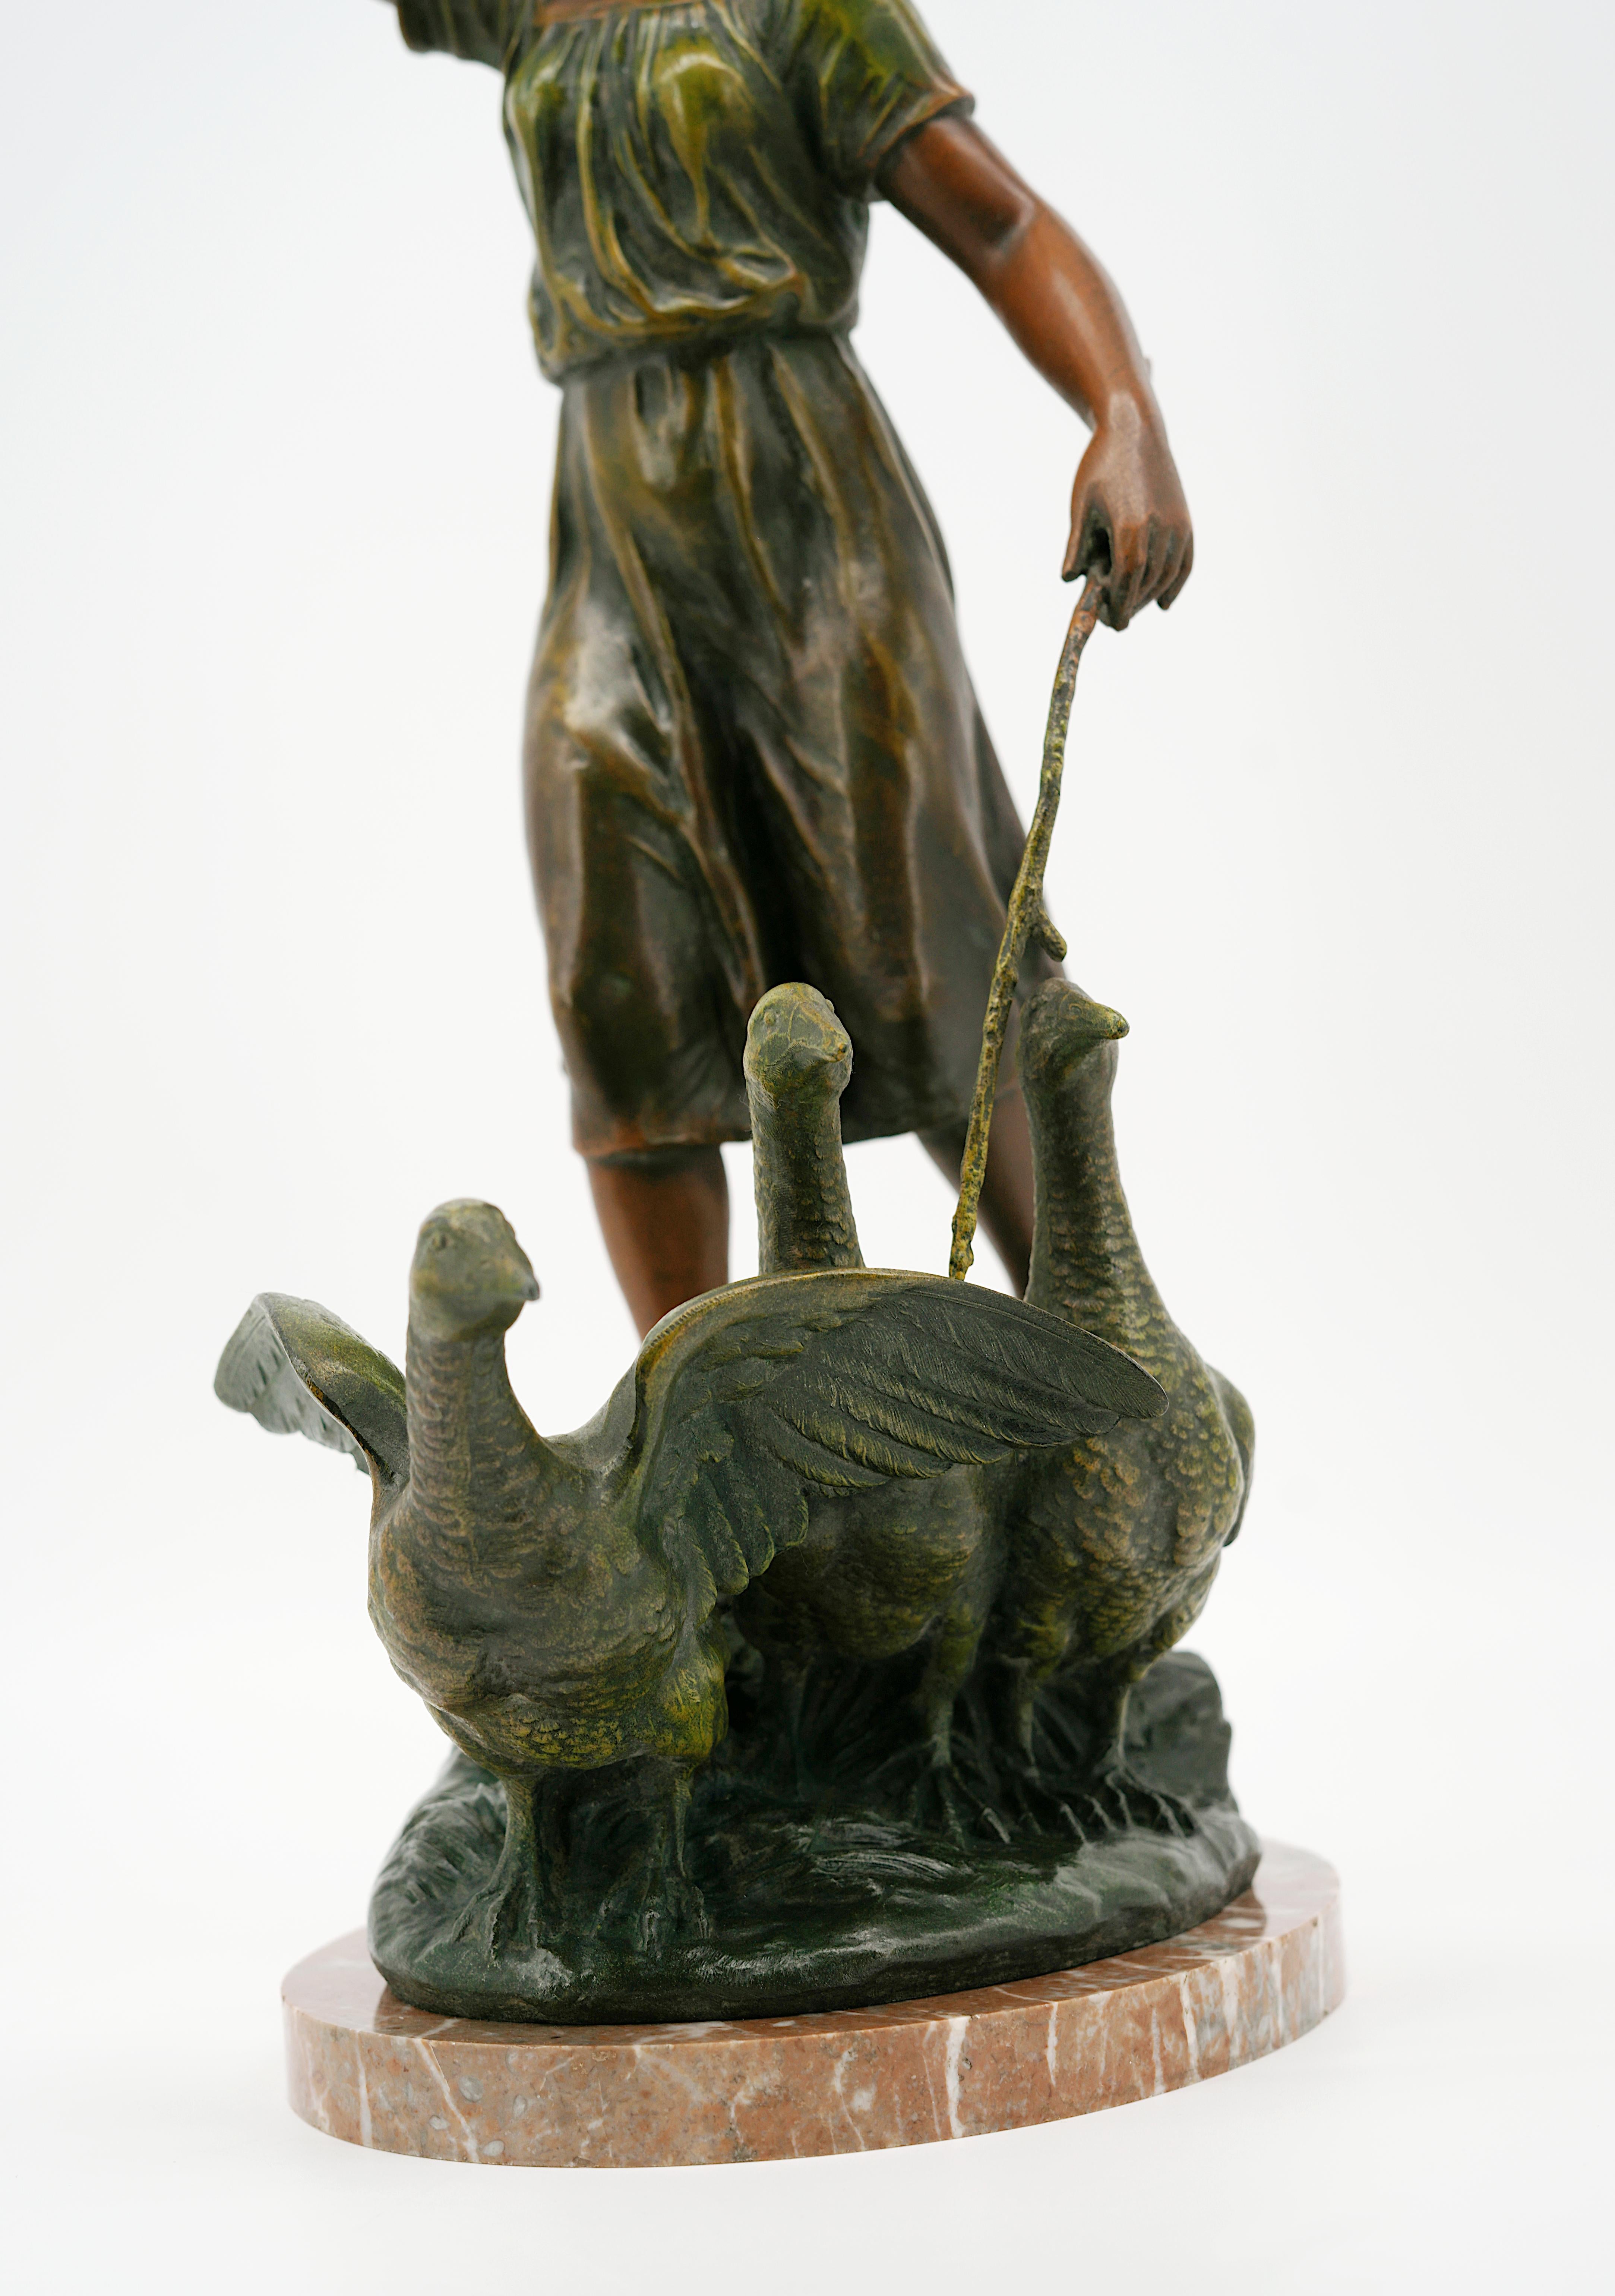 Early 20th Century French Art Nouveau Girl & Gooses Sculpture by Charles-Georges Ferville-Suan